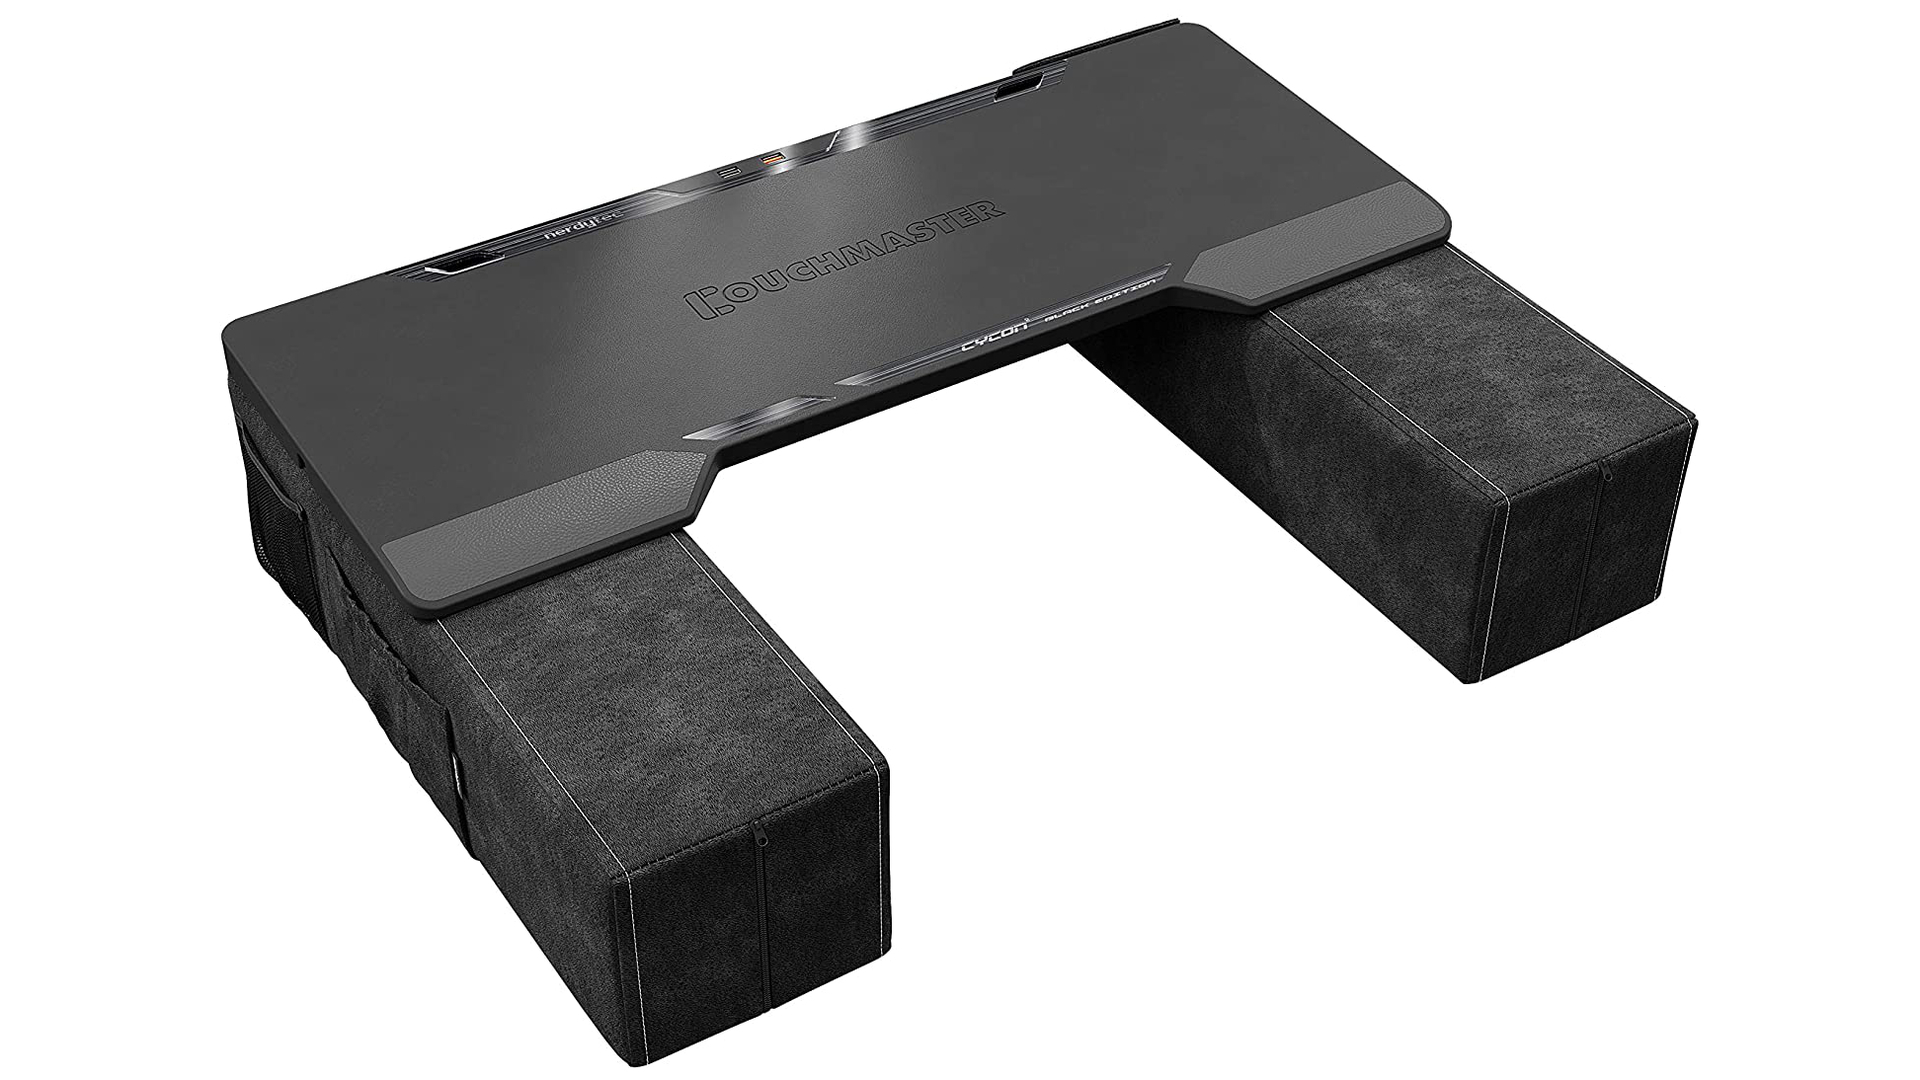 CYCON 2 Couch Gaming Lap Desk